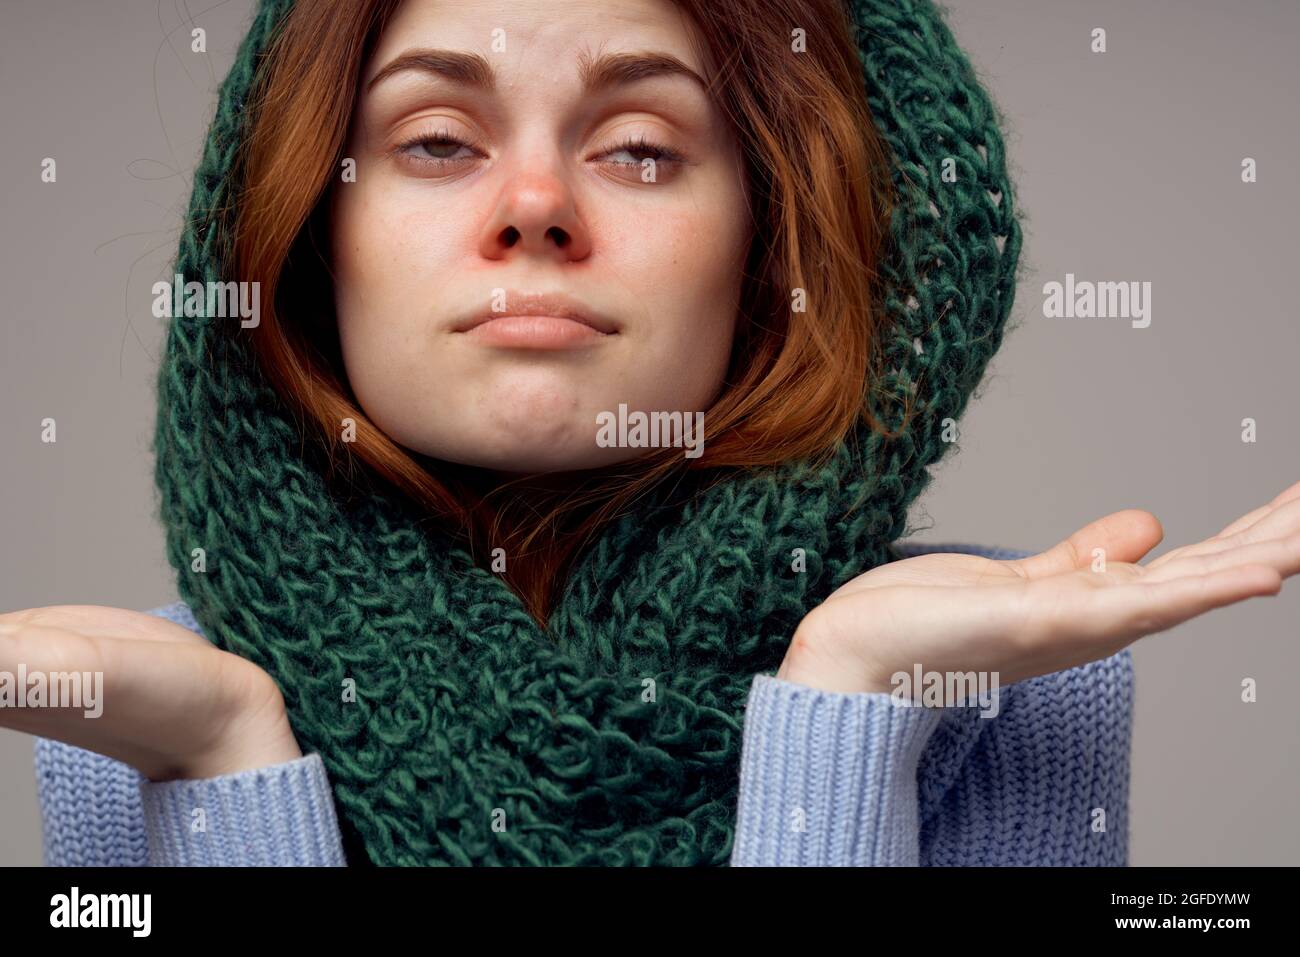 sick woman cold red nose disorder light background Stock Photo - Alamy